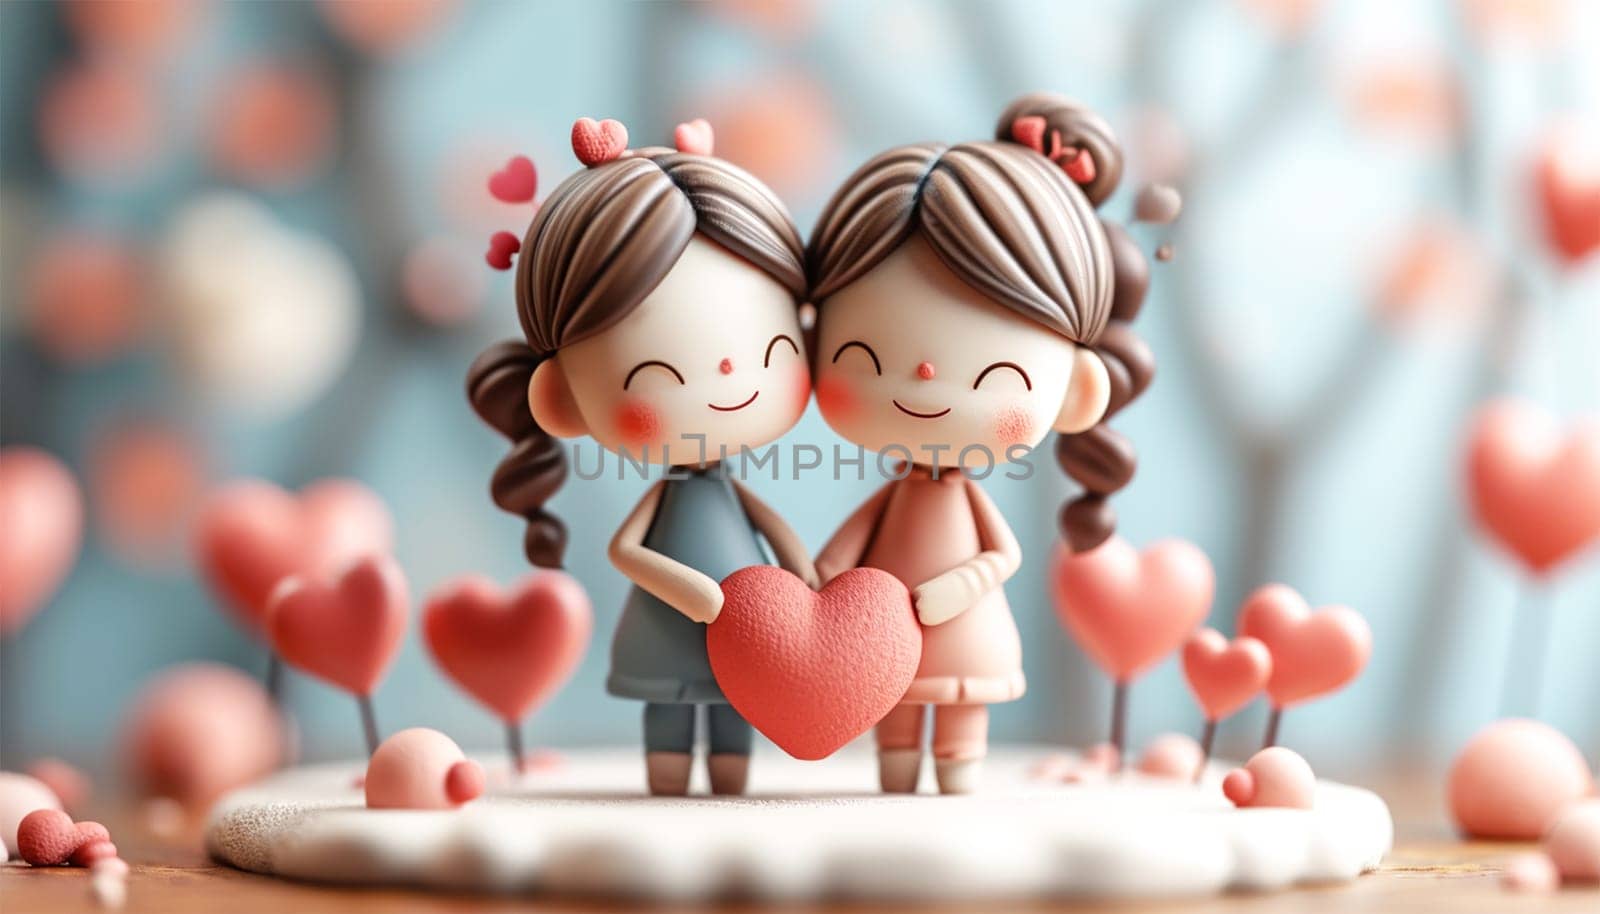 Two girls in Love,tenderness and romantic feeling concept. Happy Valentine's Day. Young couple in love holding a red heart, Cute animation copy space by Annebel146